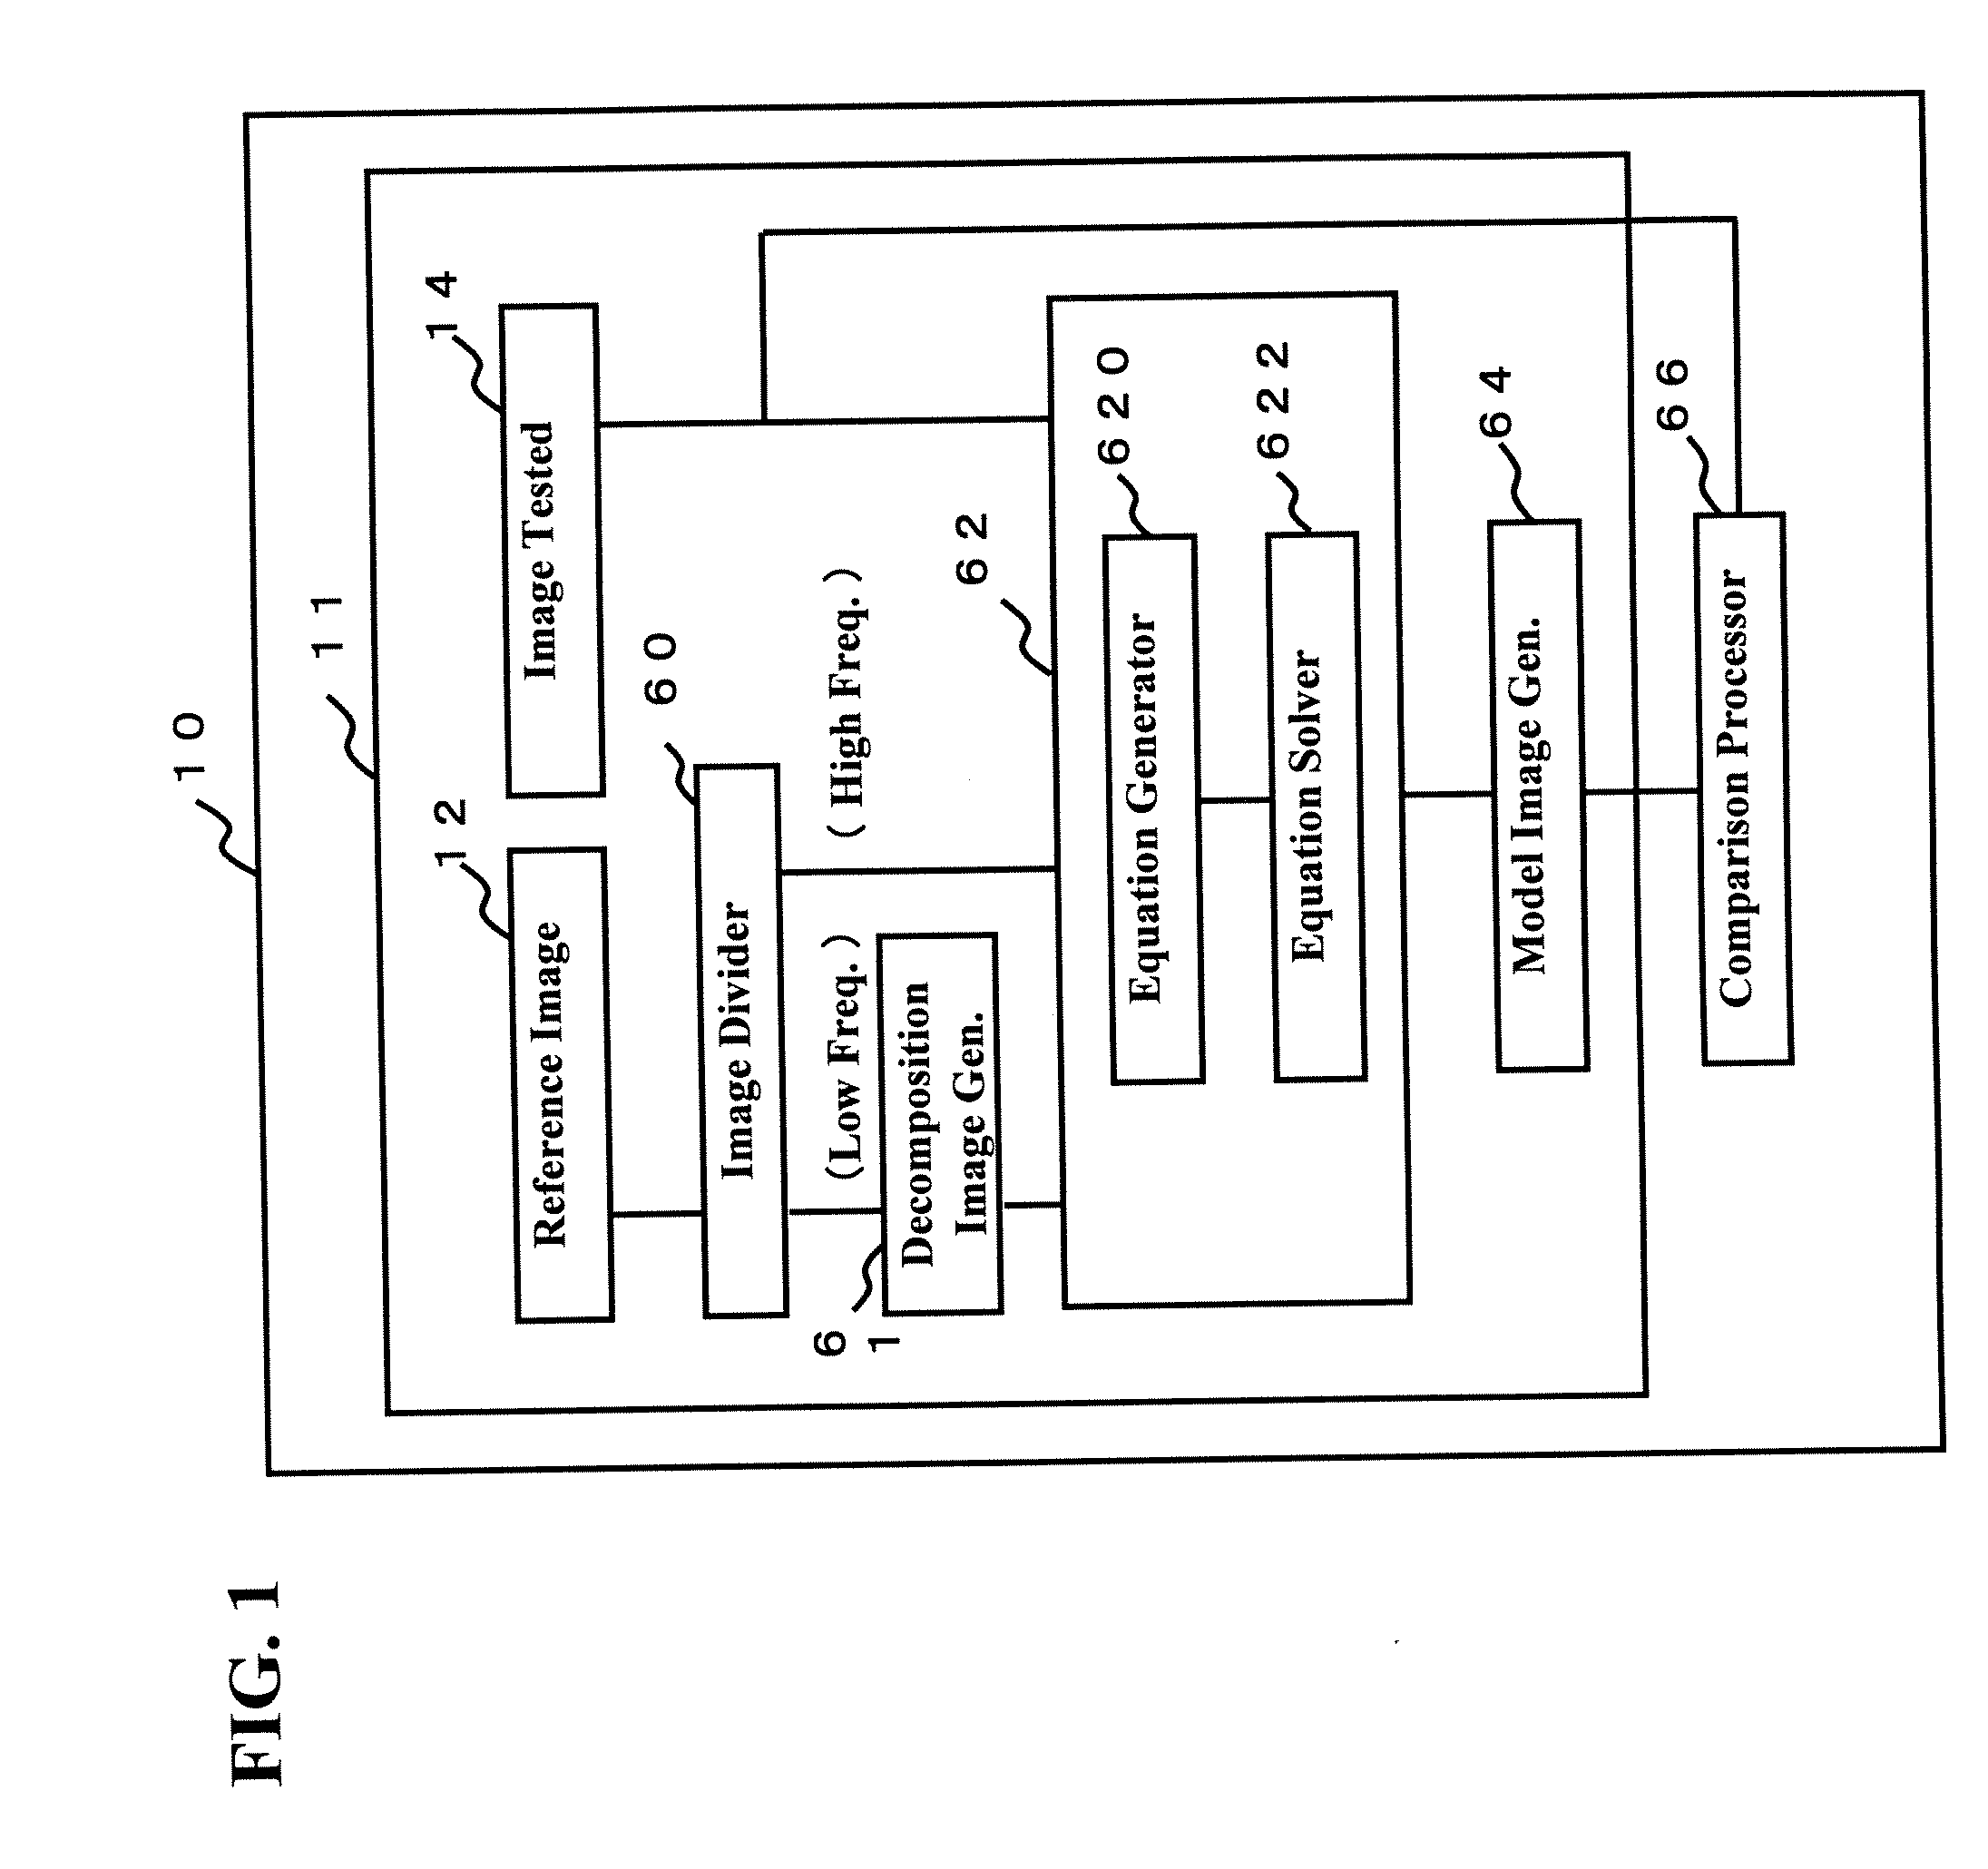 Image correction method and apparatus for use in pattern inspection system